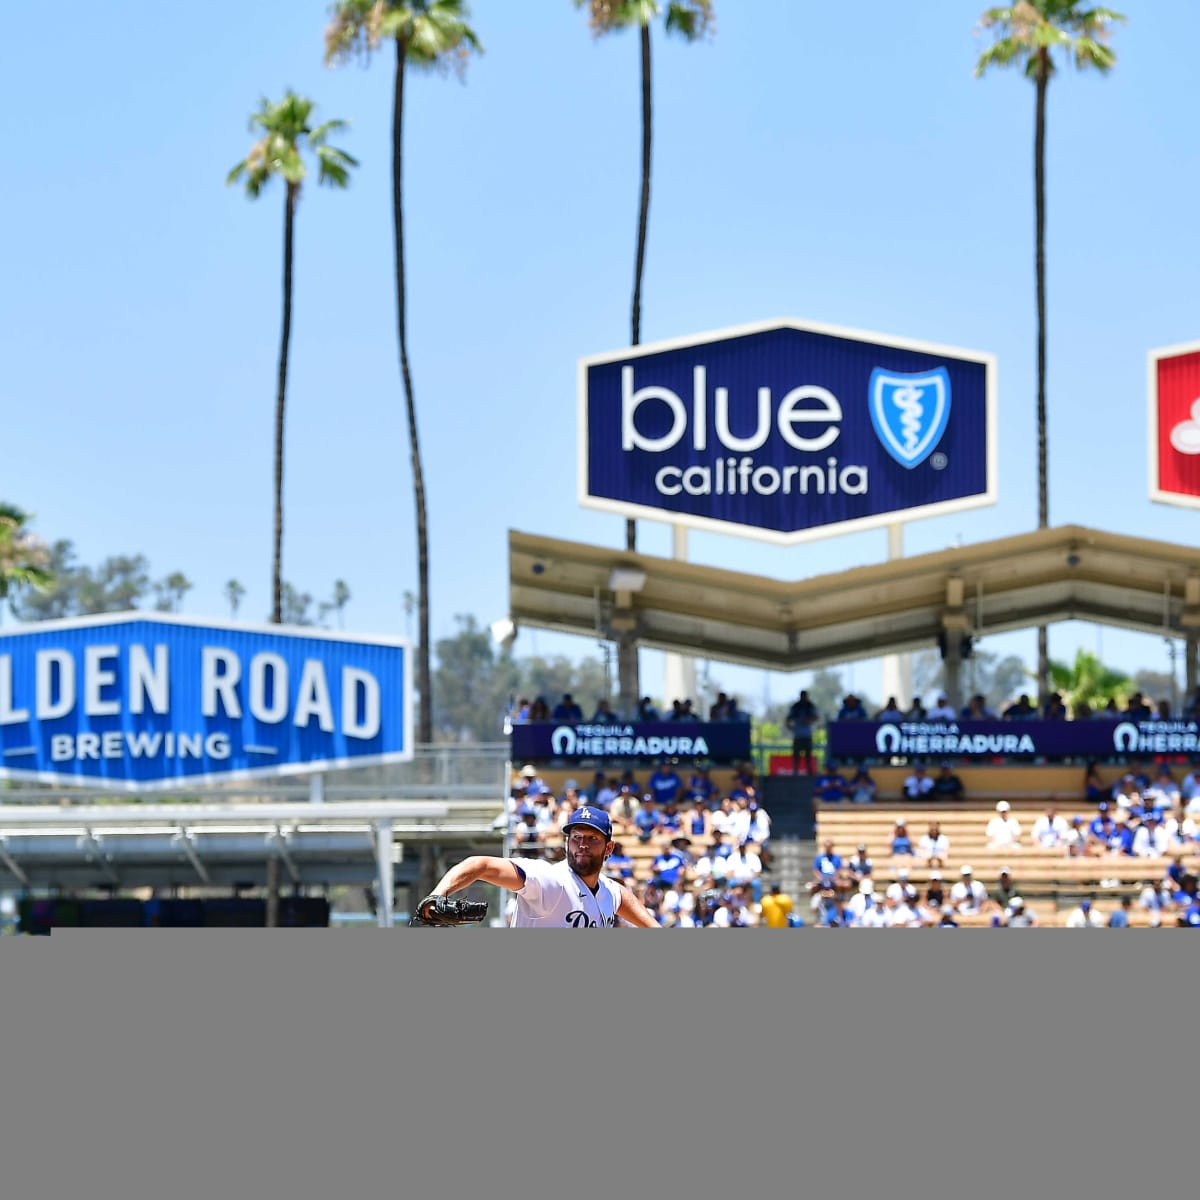 Luggage Storage Dodger Stadium - 24/7 - From $0.95/hour or $5.95/day